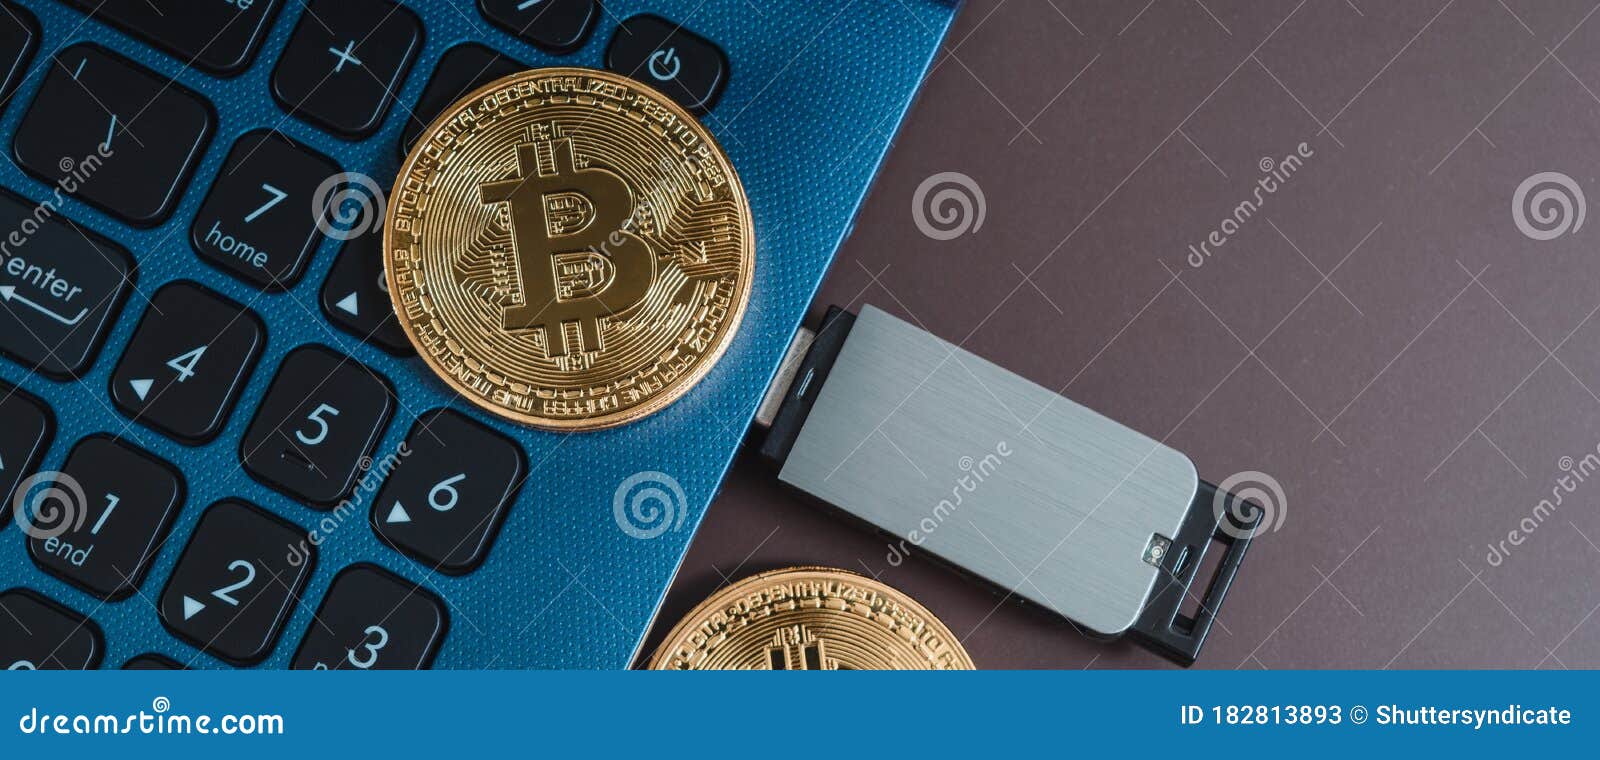 how to buy bitcoin ledger